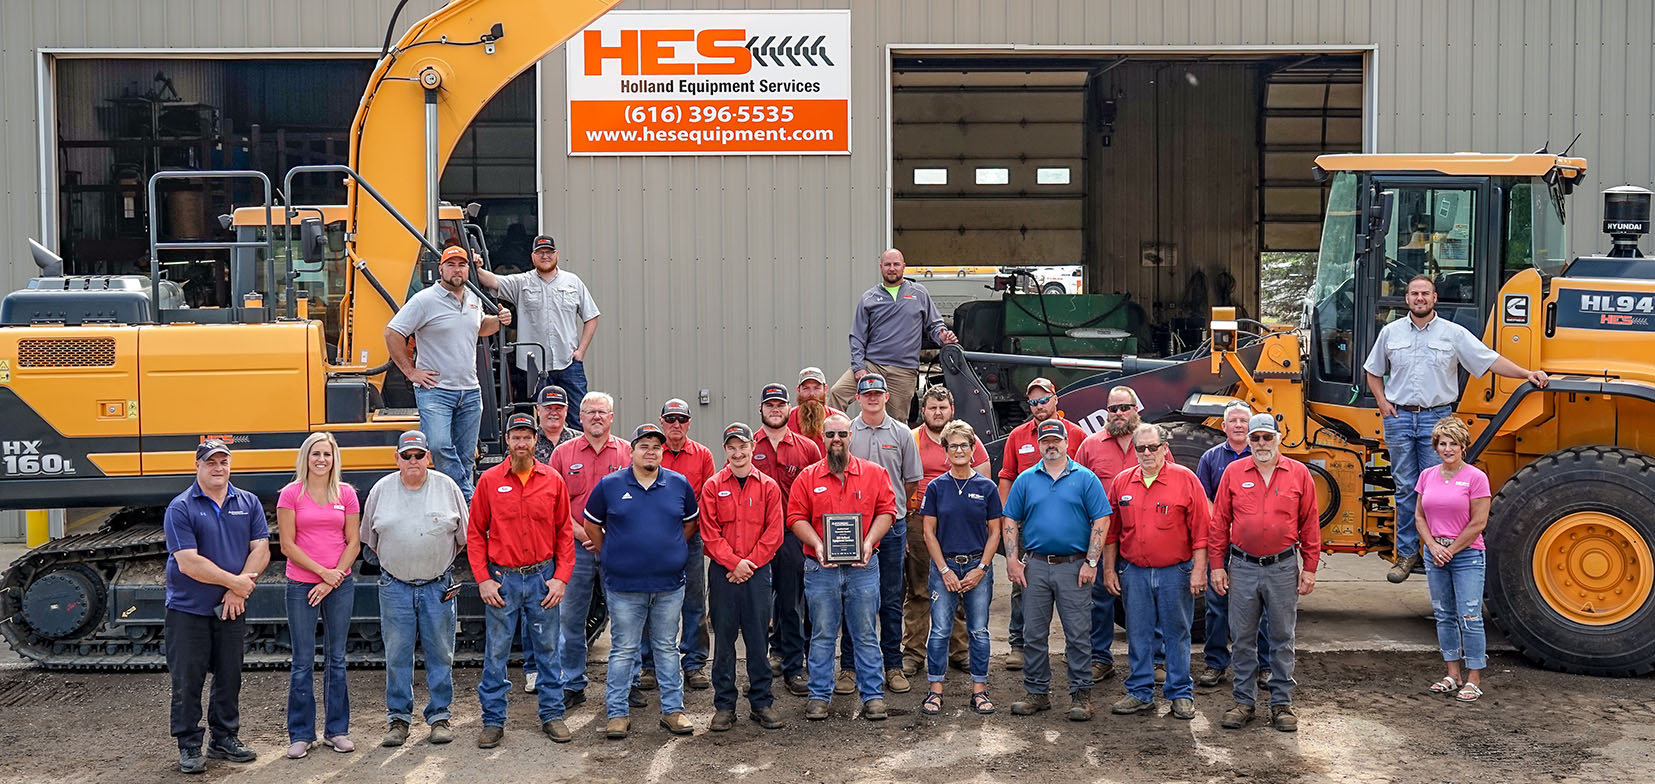 Hyundai Construction Equipment Americas Adds Holland Equipment Services to Its Dealer Network